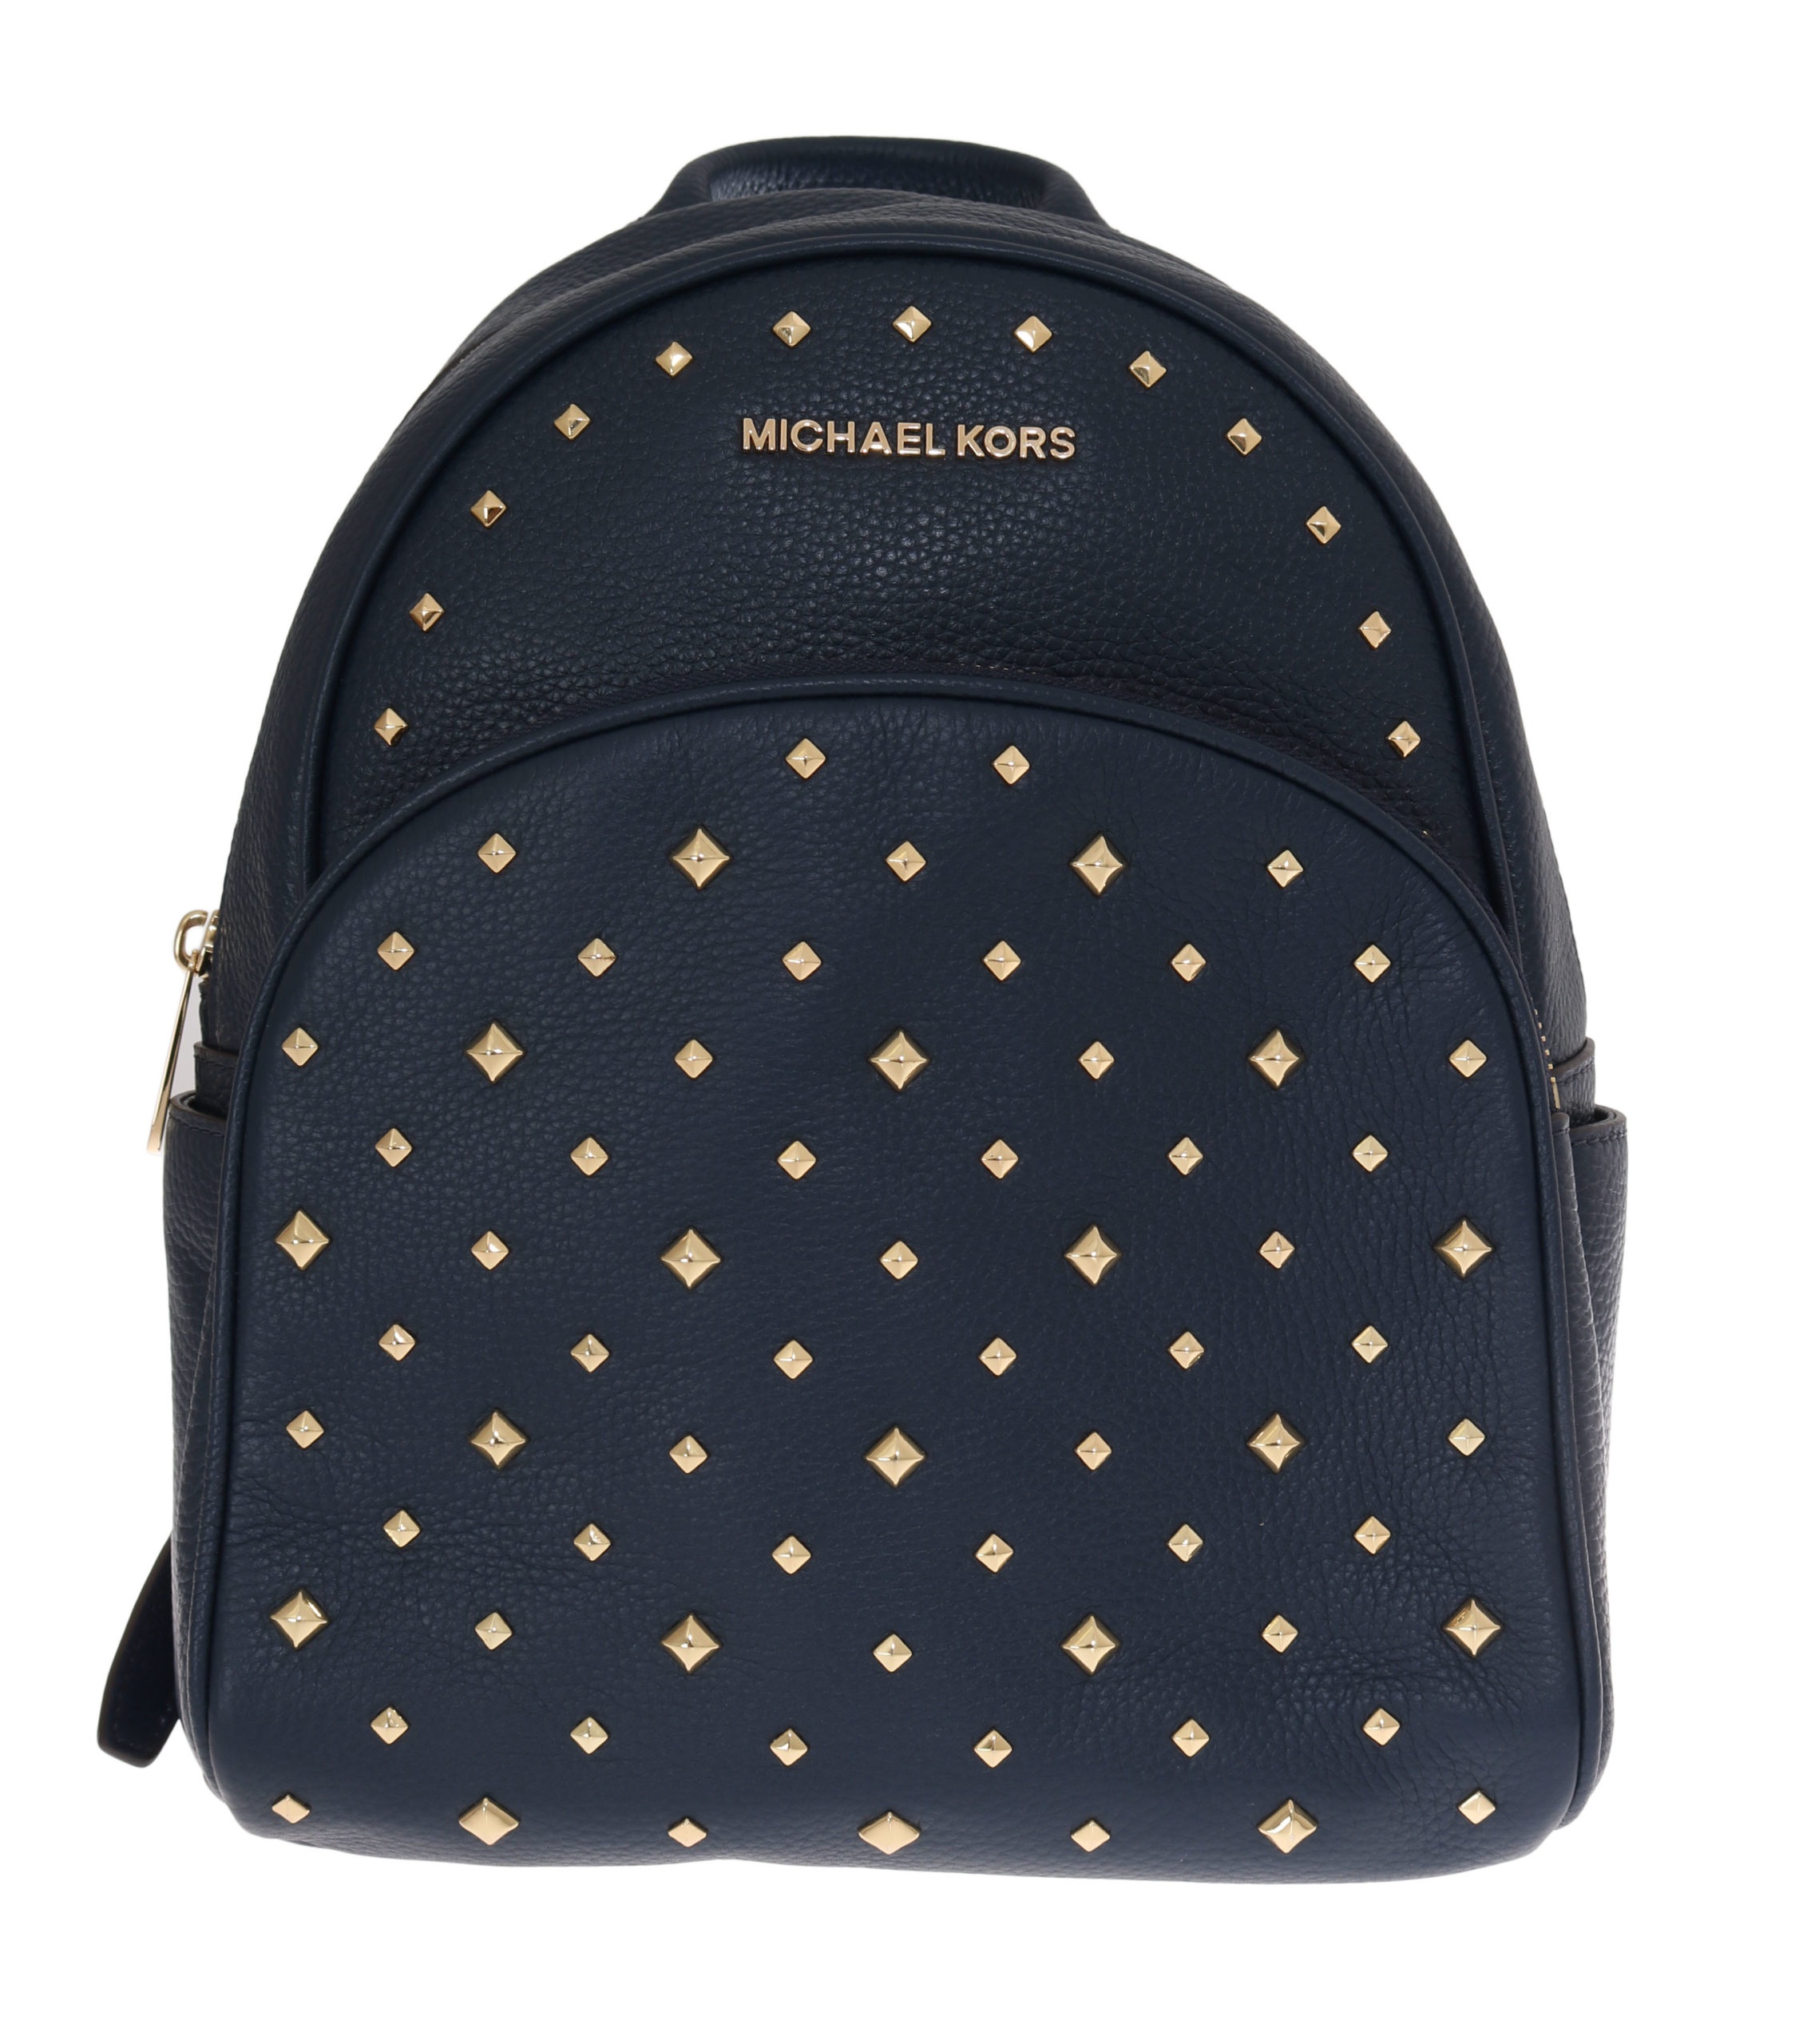 Michael kors Navy Blue ABBEY Leather Backpack Bag • Fashion Brands Outlet